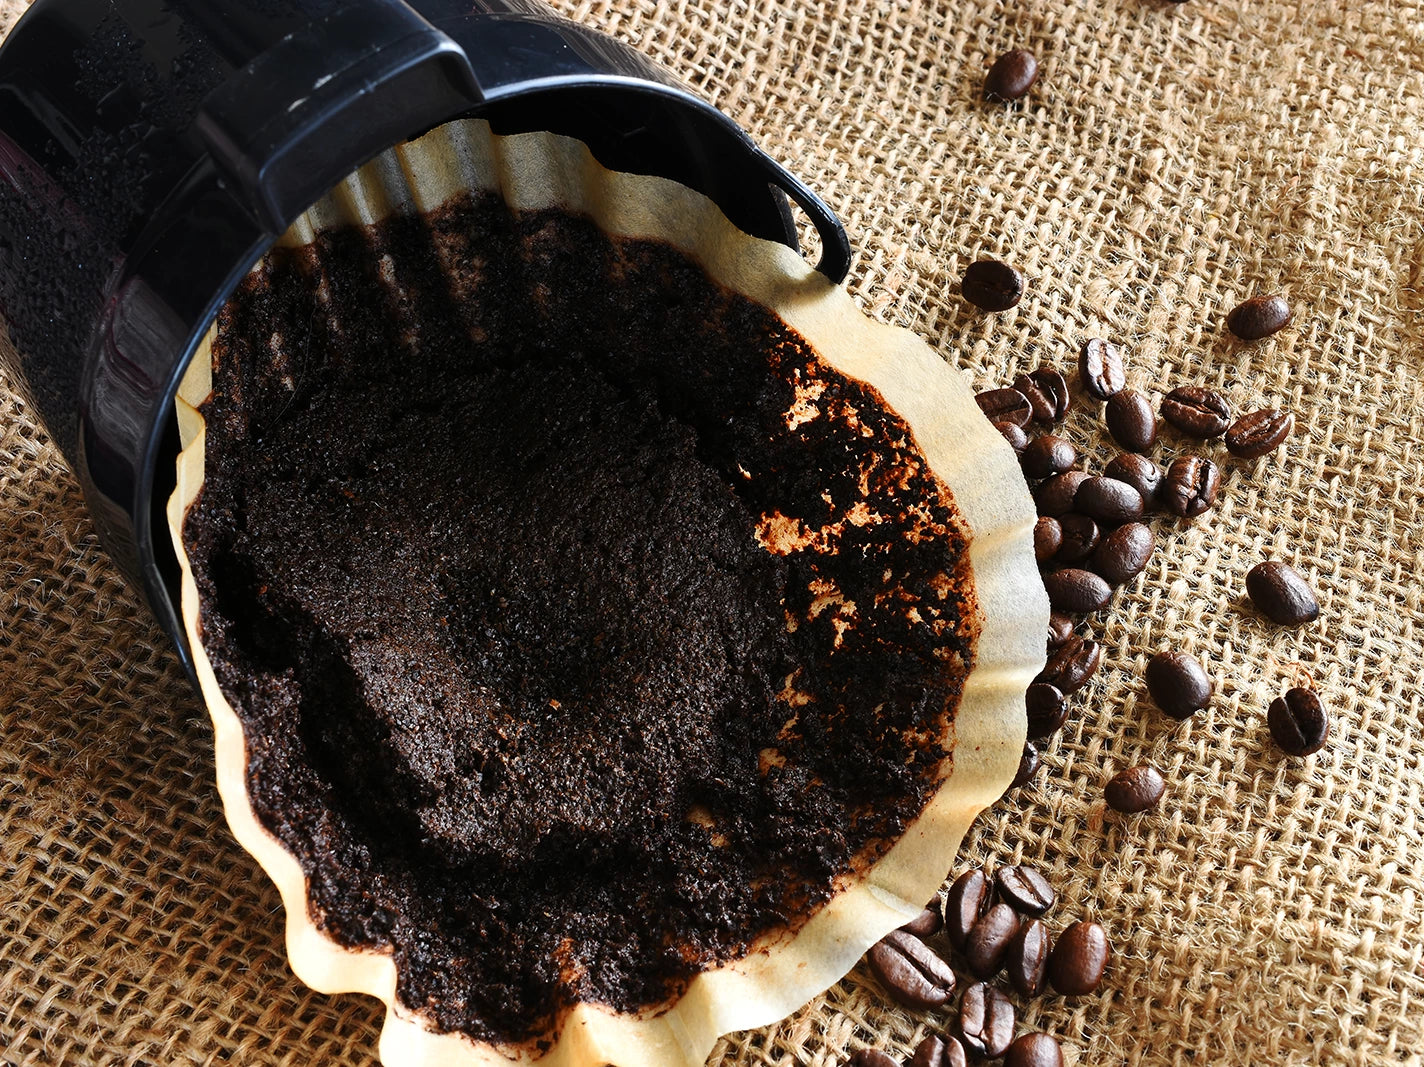 What To Do With Coffee Grounds: 8 Simple, Creative Uses